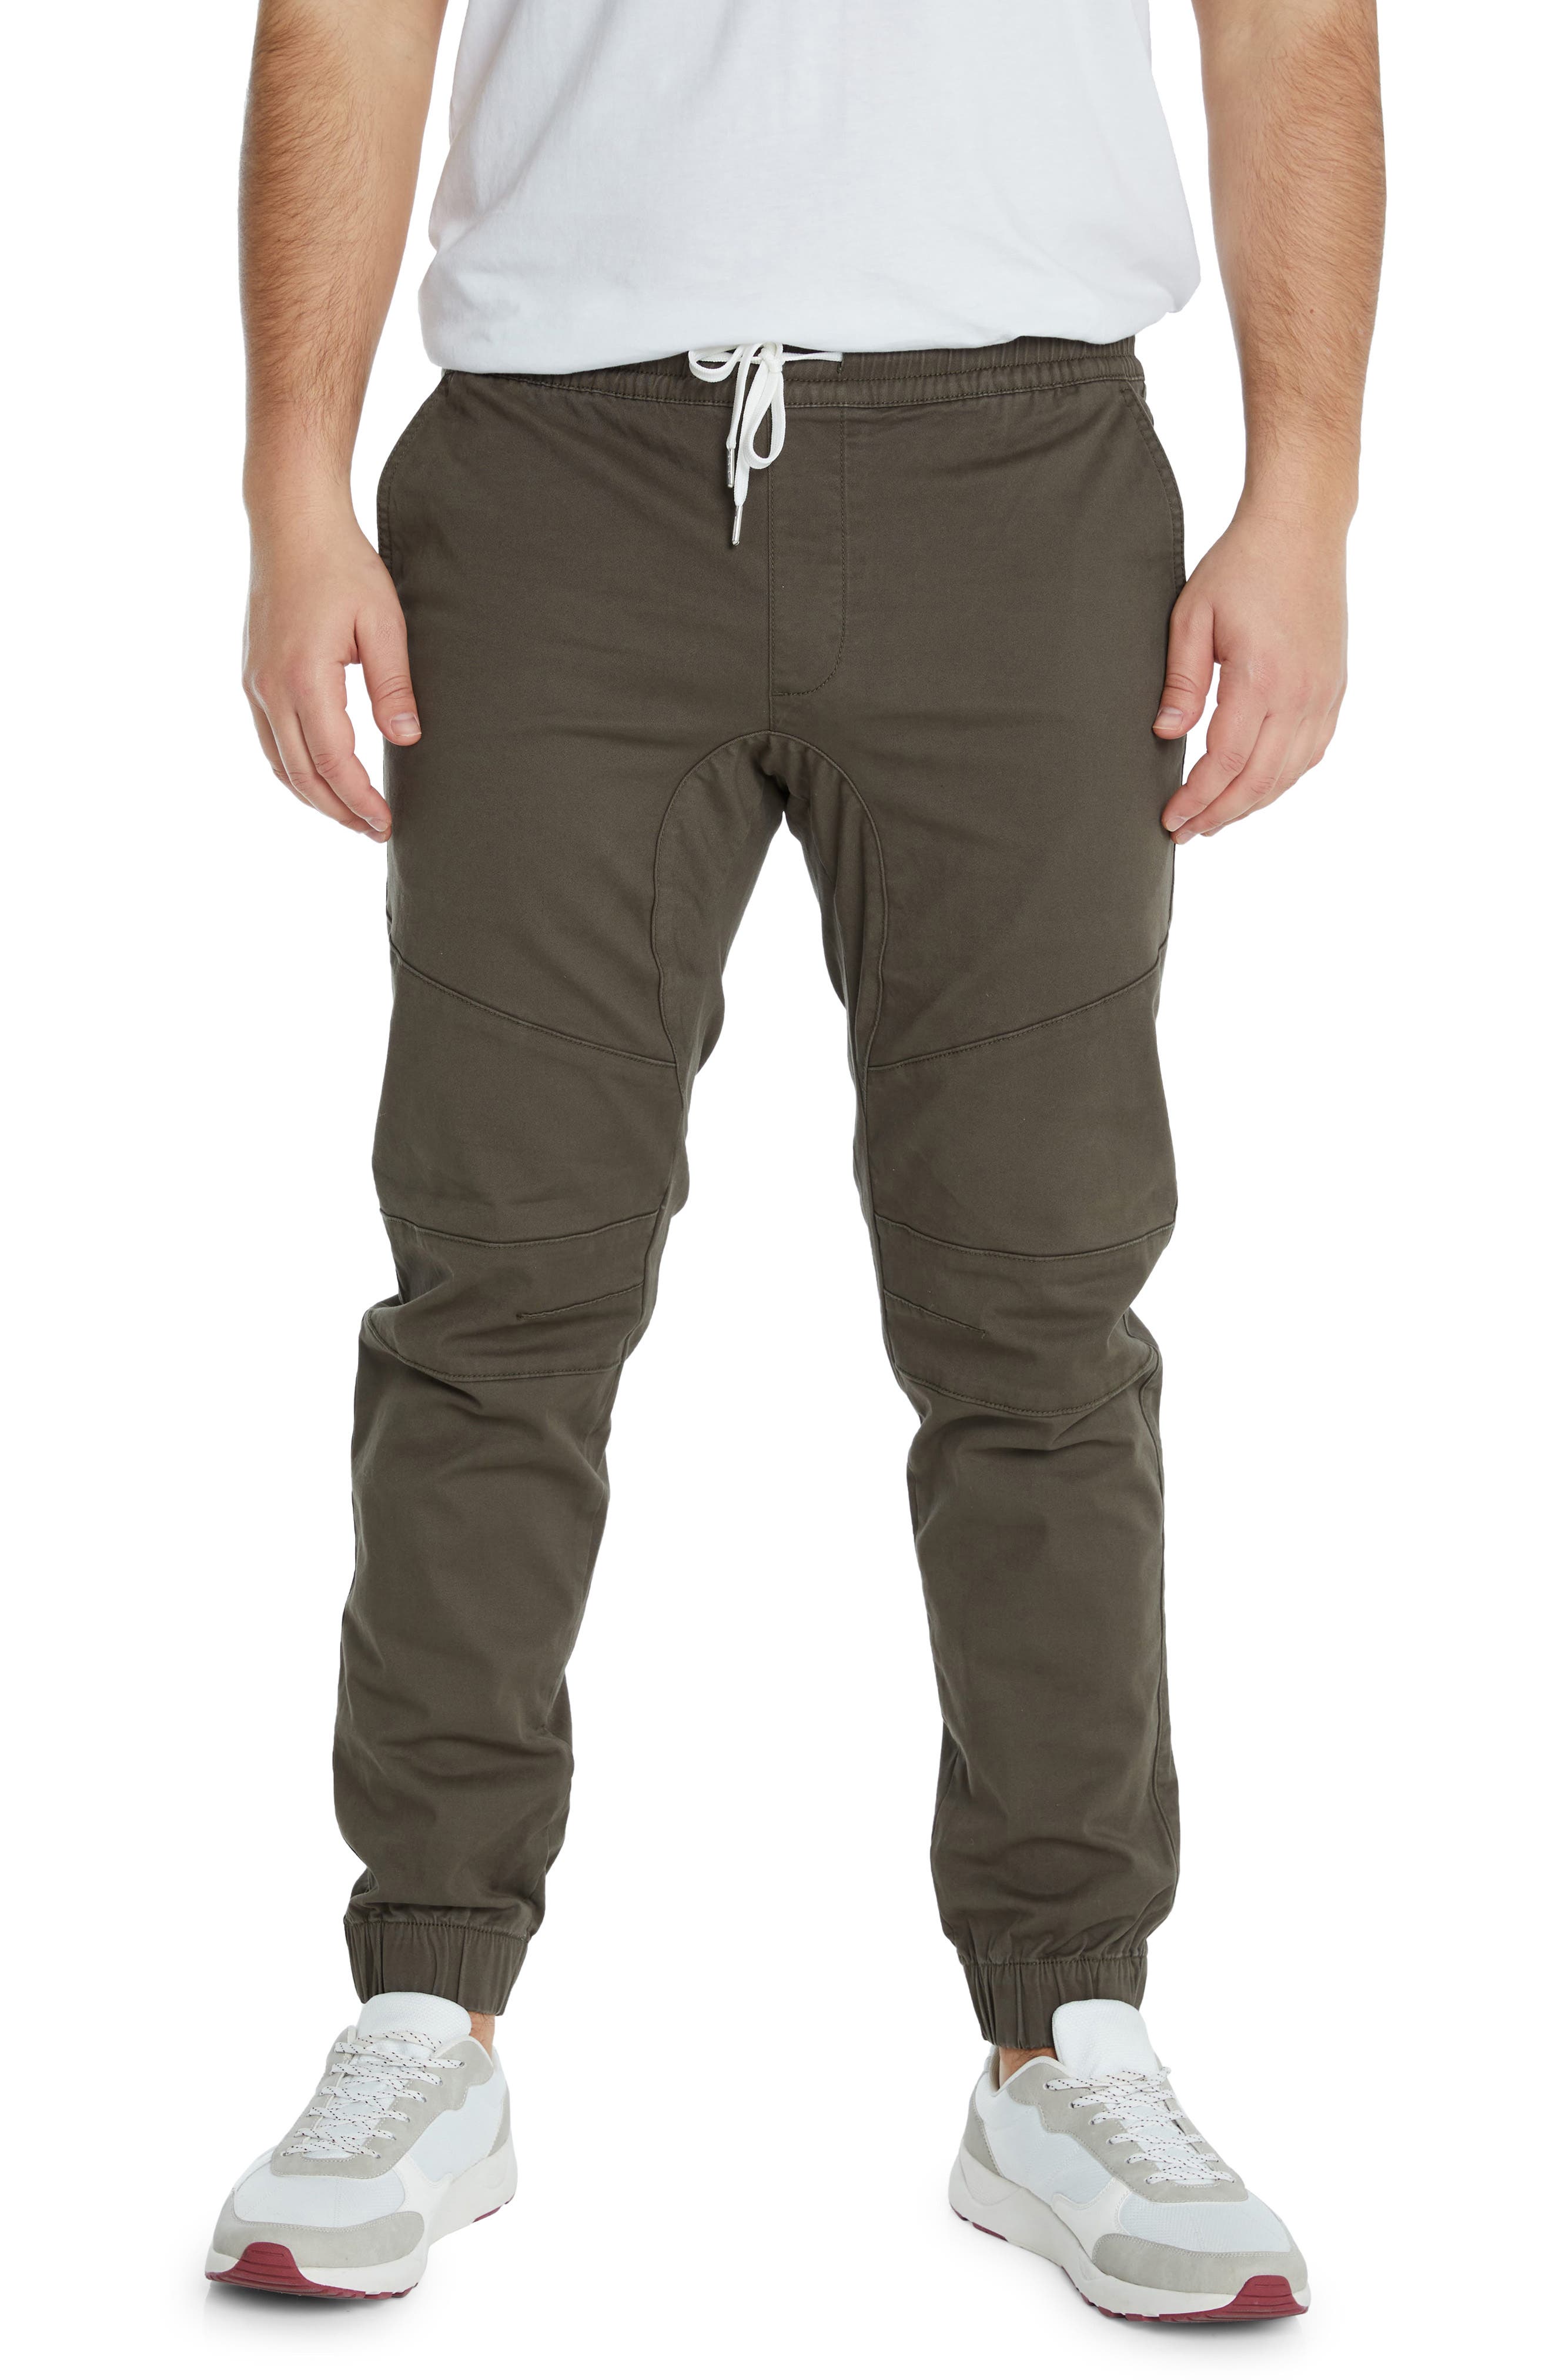 Johnny Bigg Hastings Stretch Cotton Joggers in Army